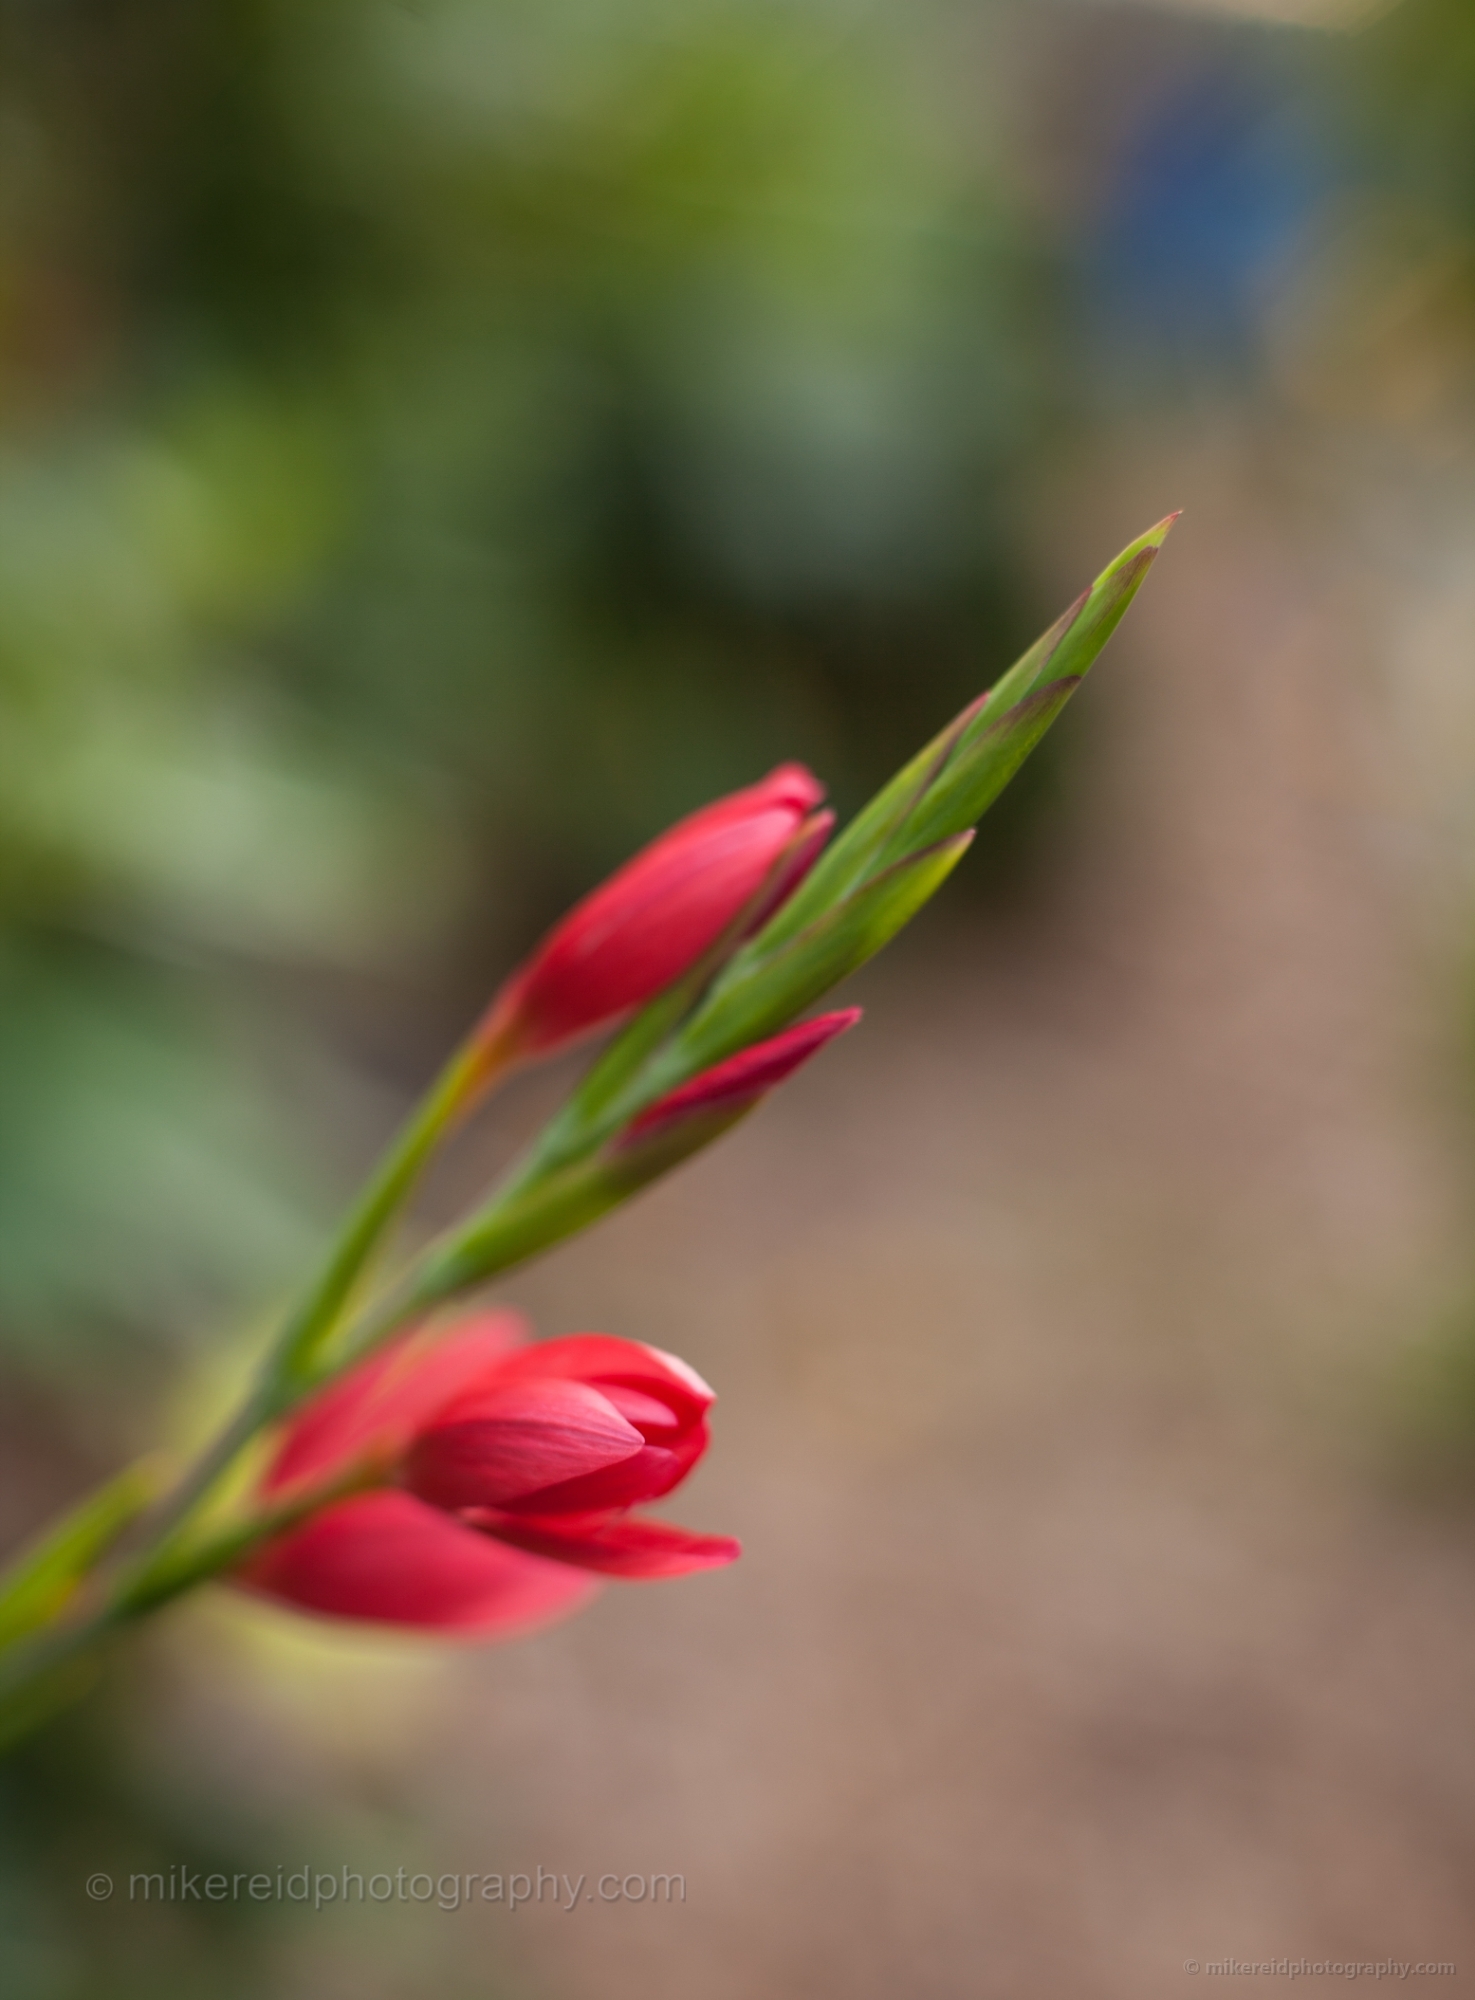 Red Lilly Floral Imagery.jpg